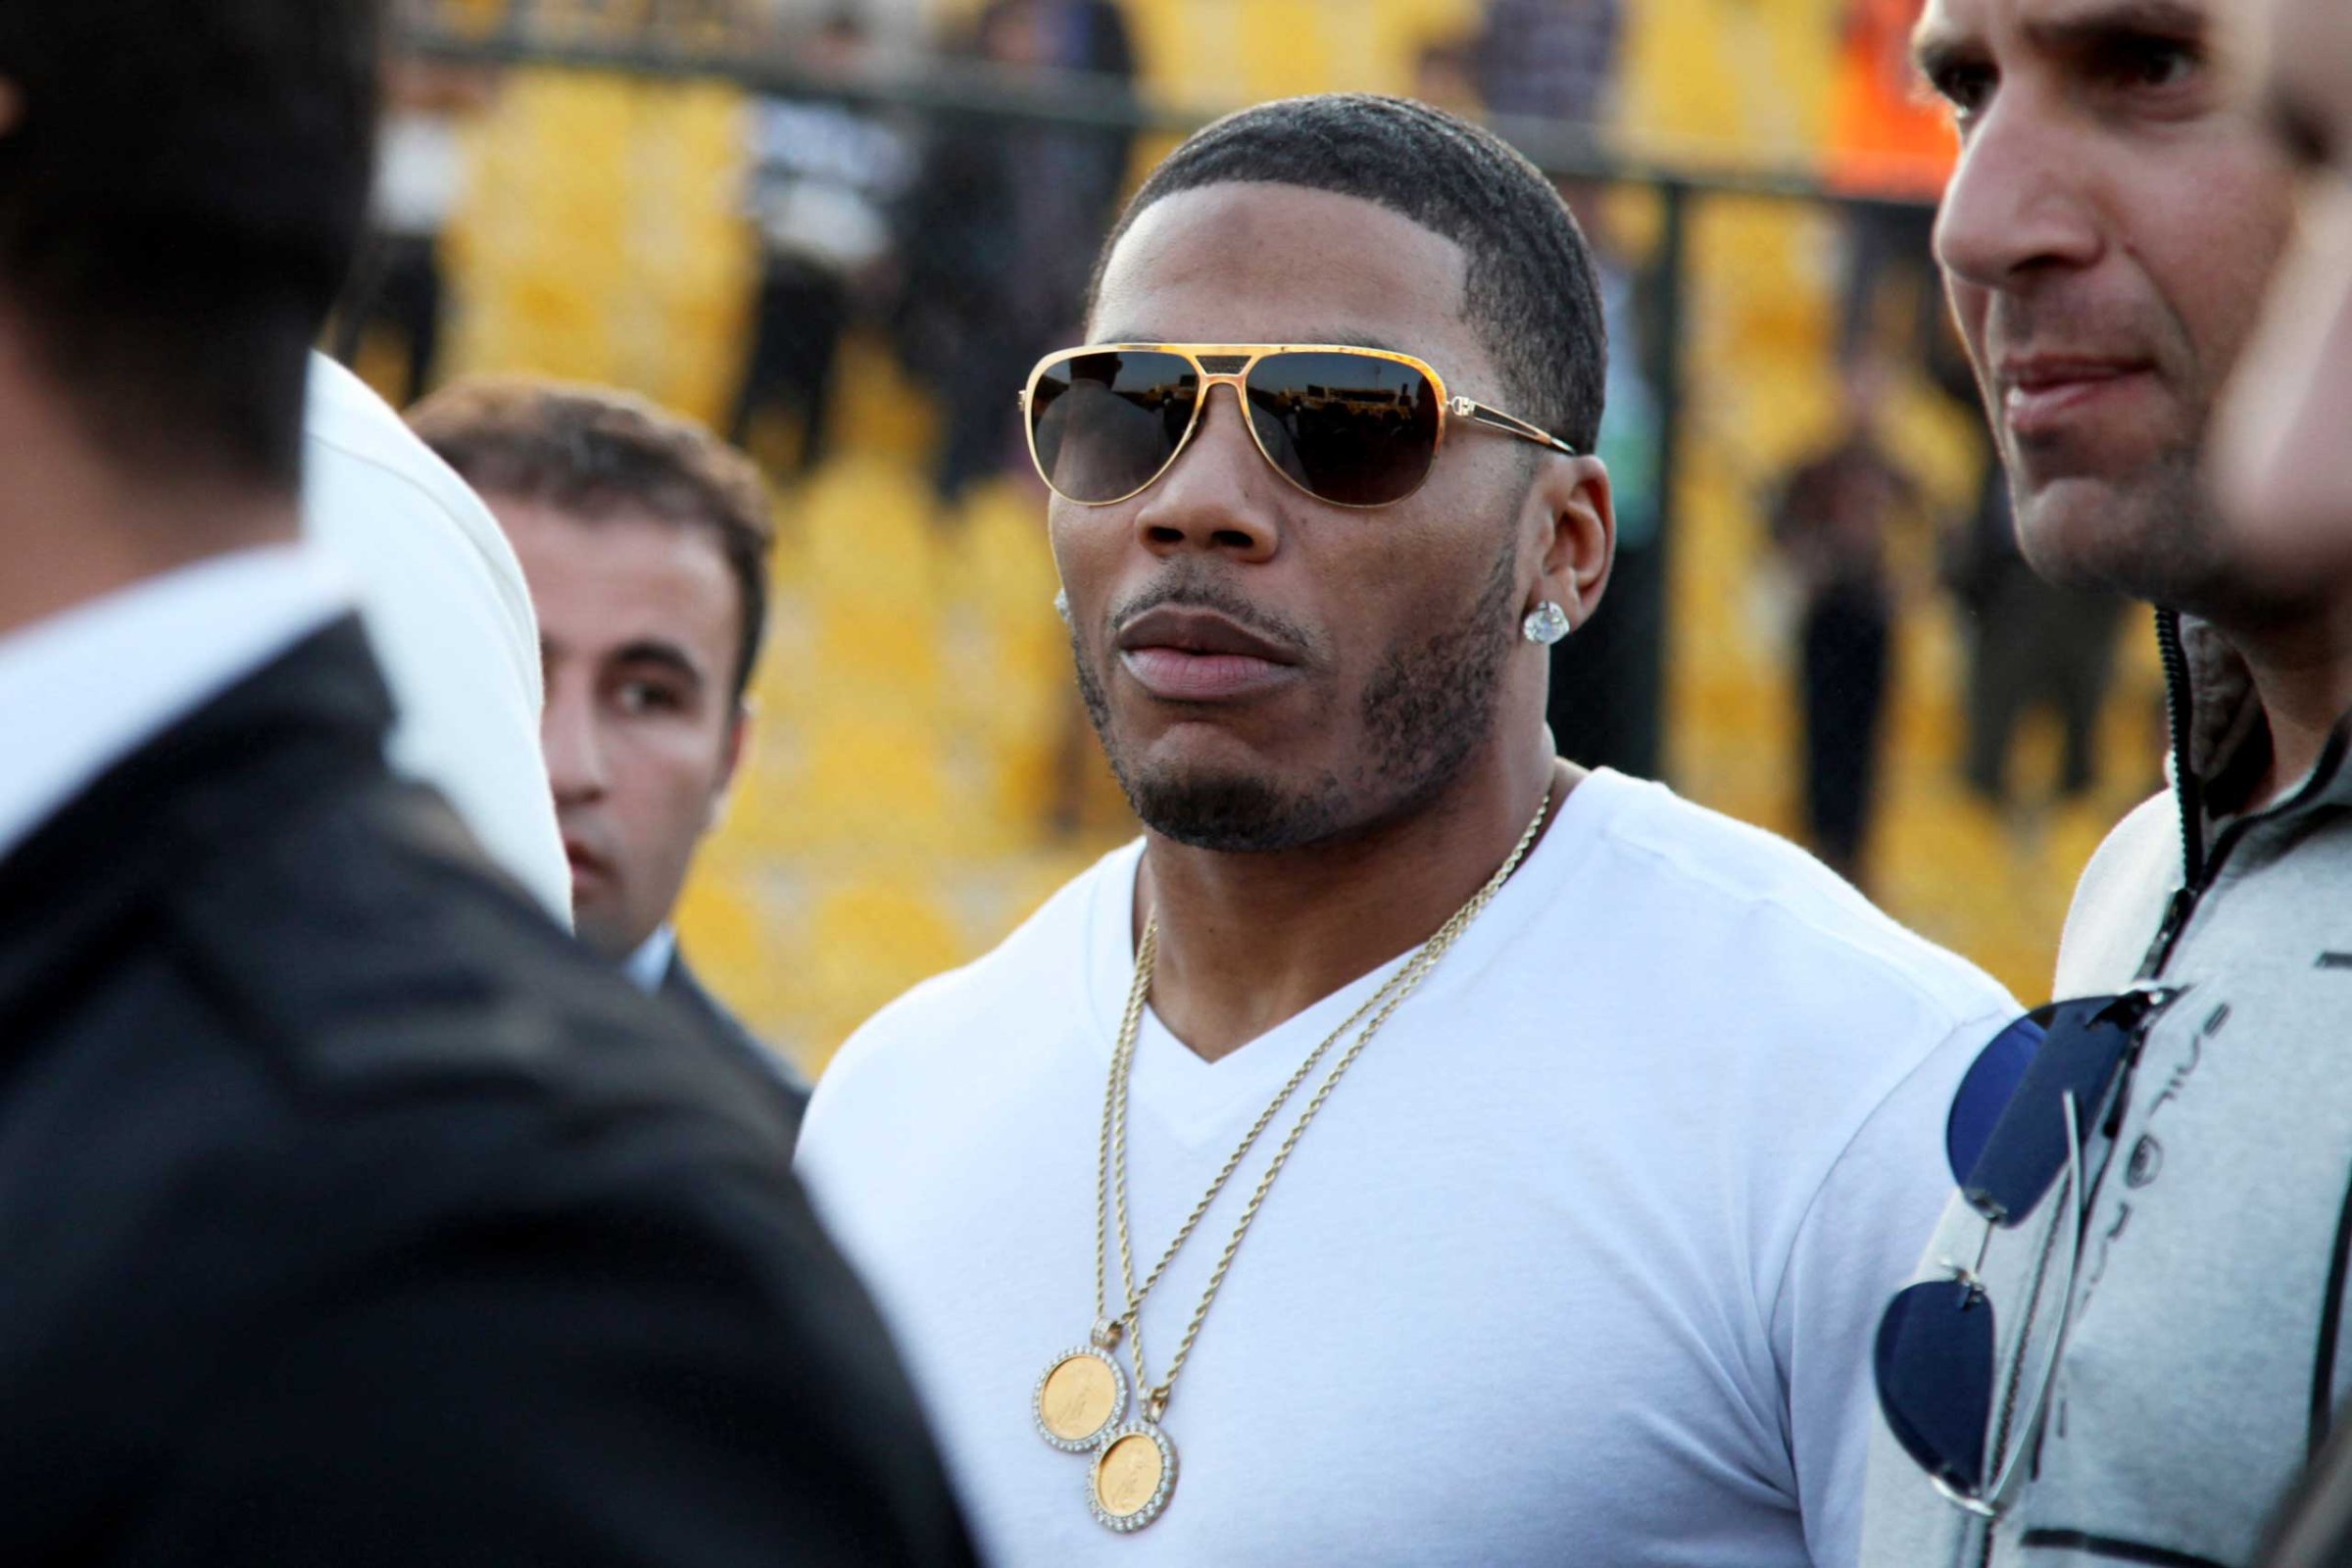 Nelly is facing felony drug charges after being arrested in Tennessee, April 11, 2015.